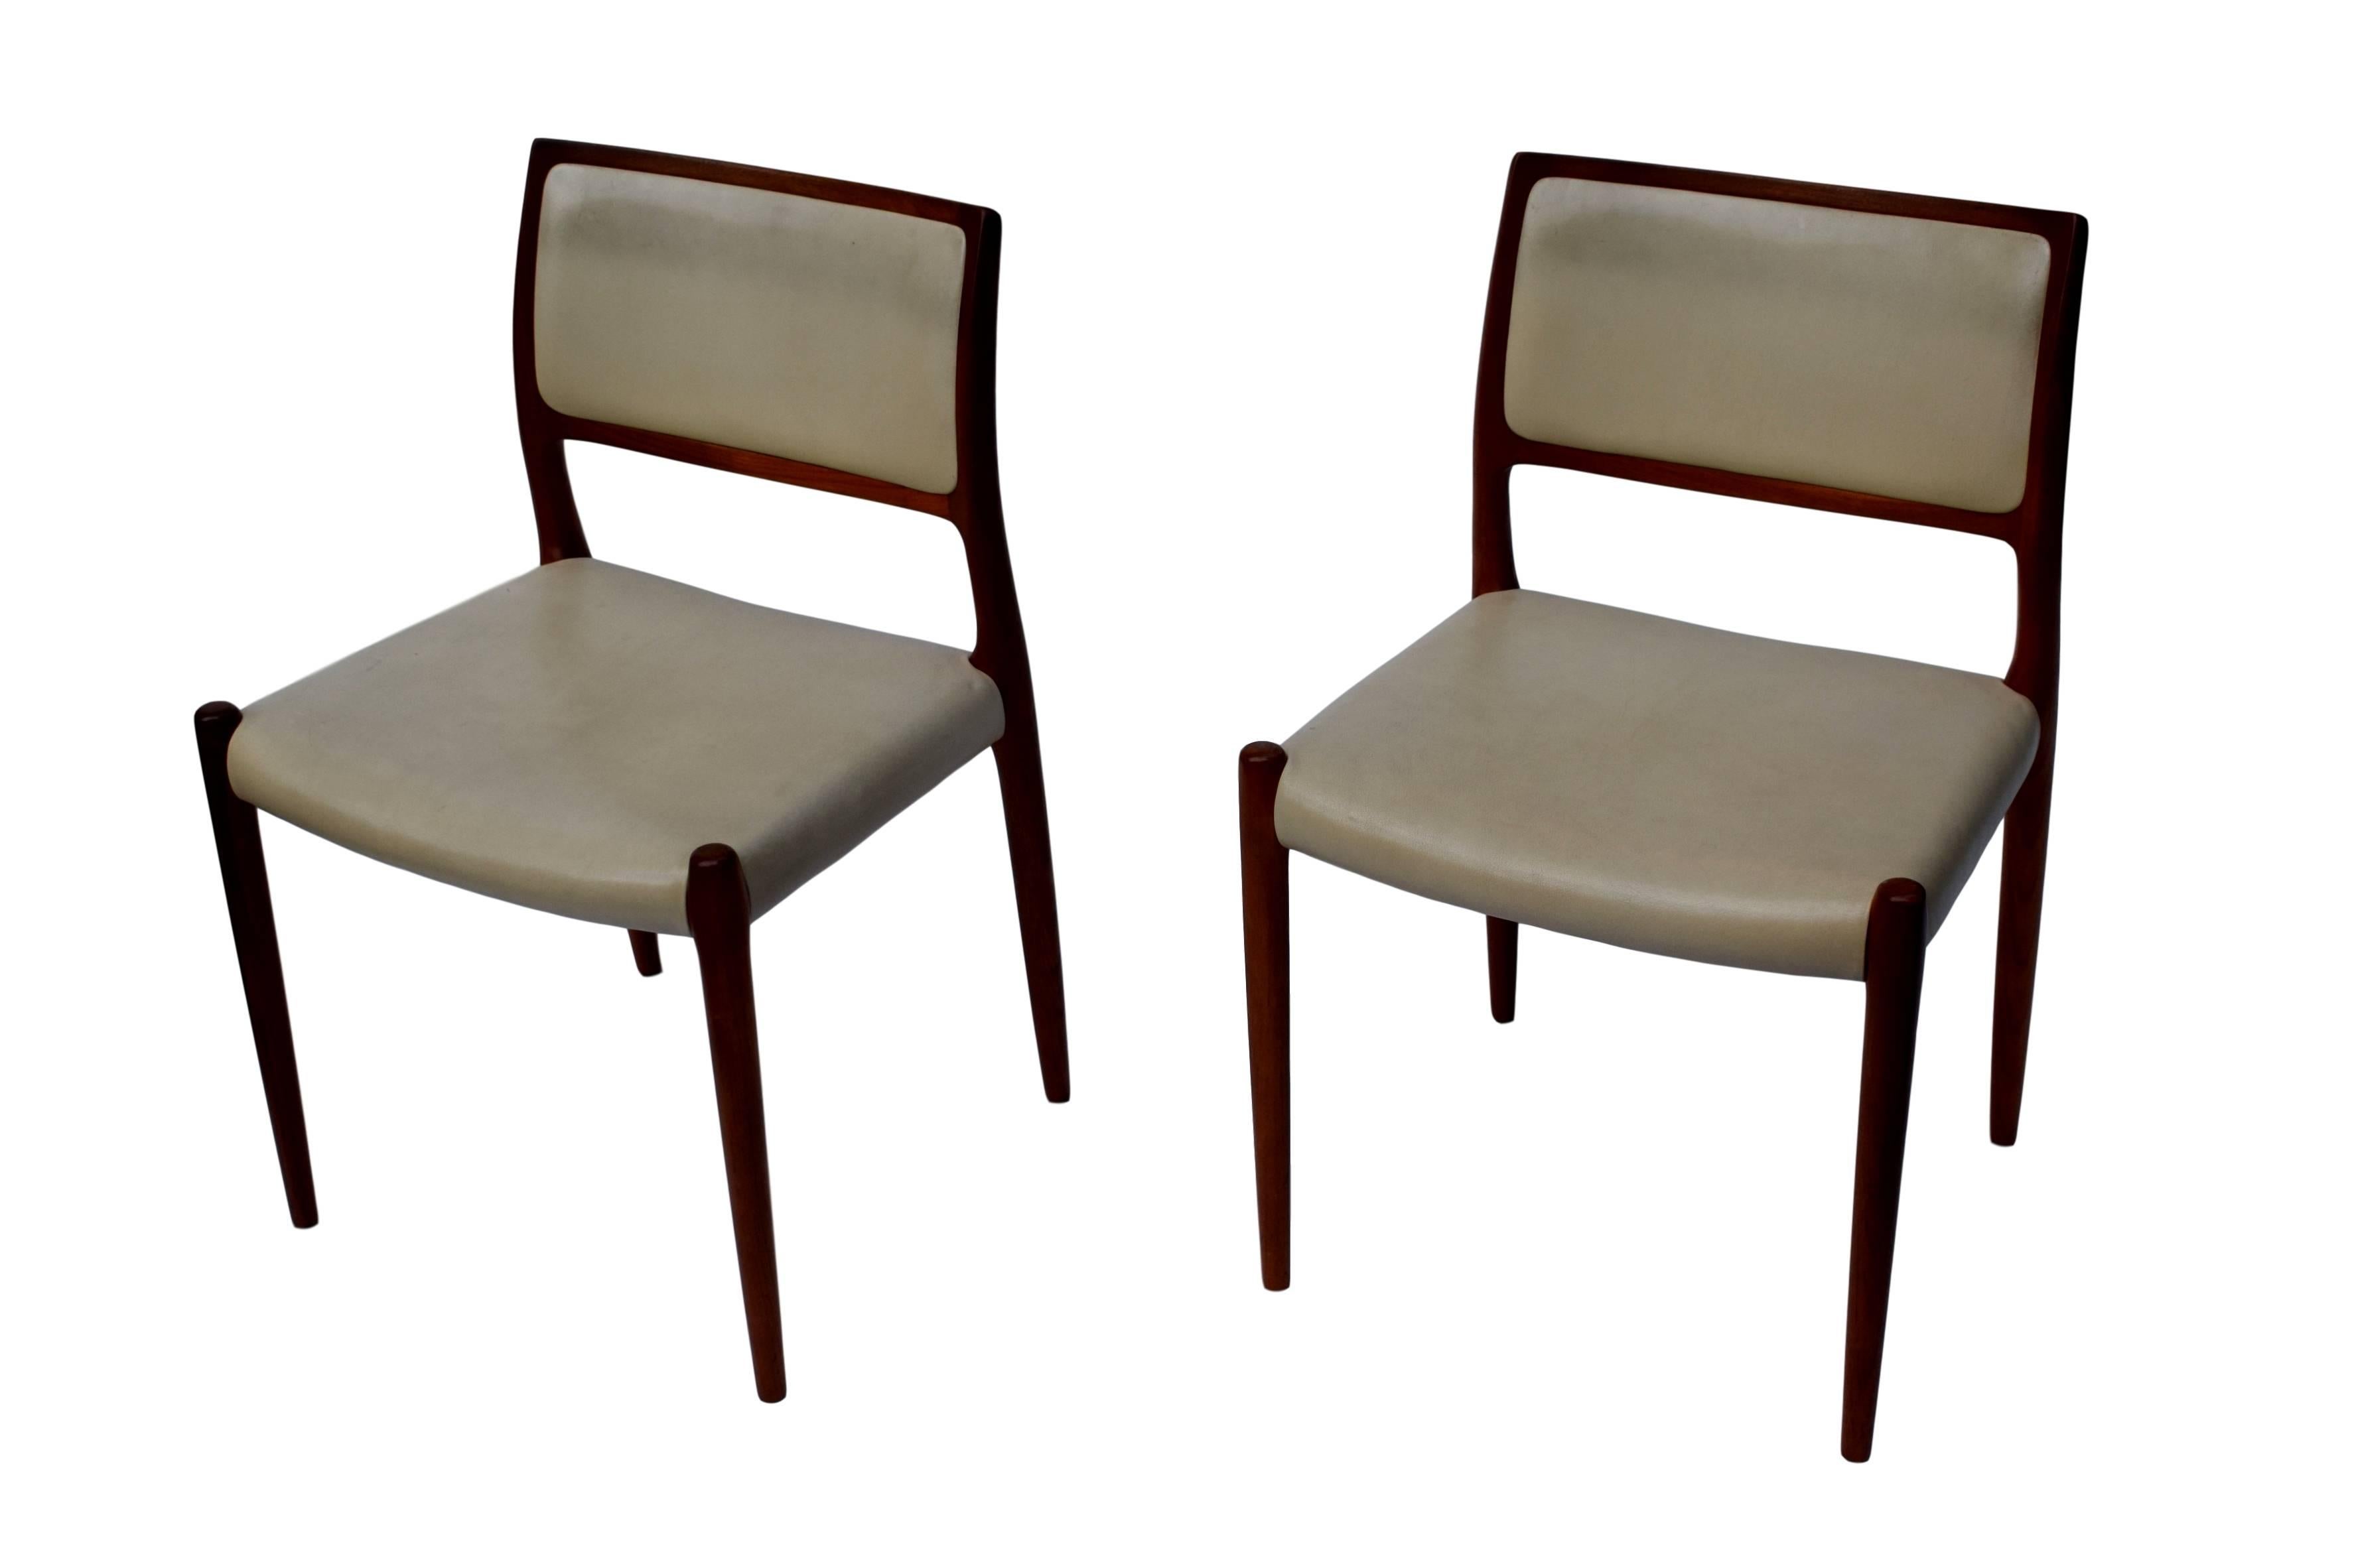 A set of four dining chairs by Niels O. Møller. Model 80. Teak frame with tapered legs. Design from 1968. The chairs are upholstered with patinated beige leather. Produced by J.L. Møller Møbelfabrik. Stamped with 